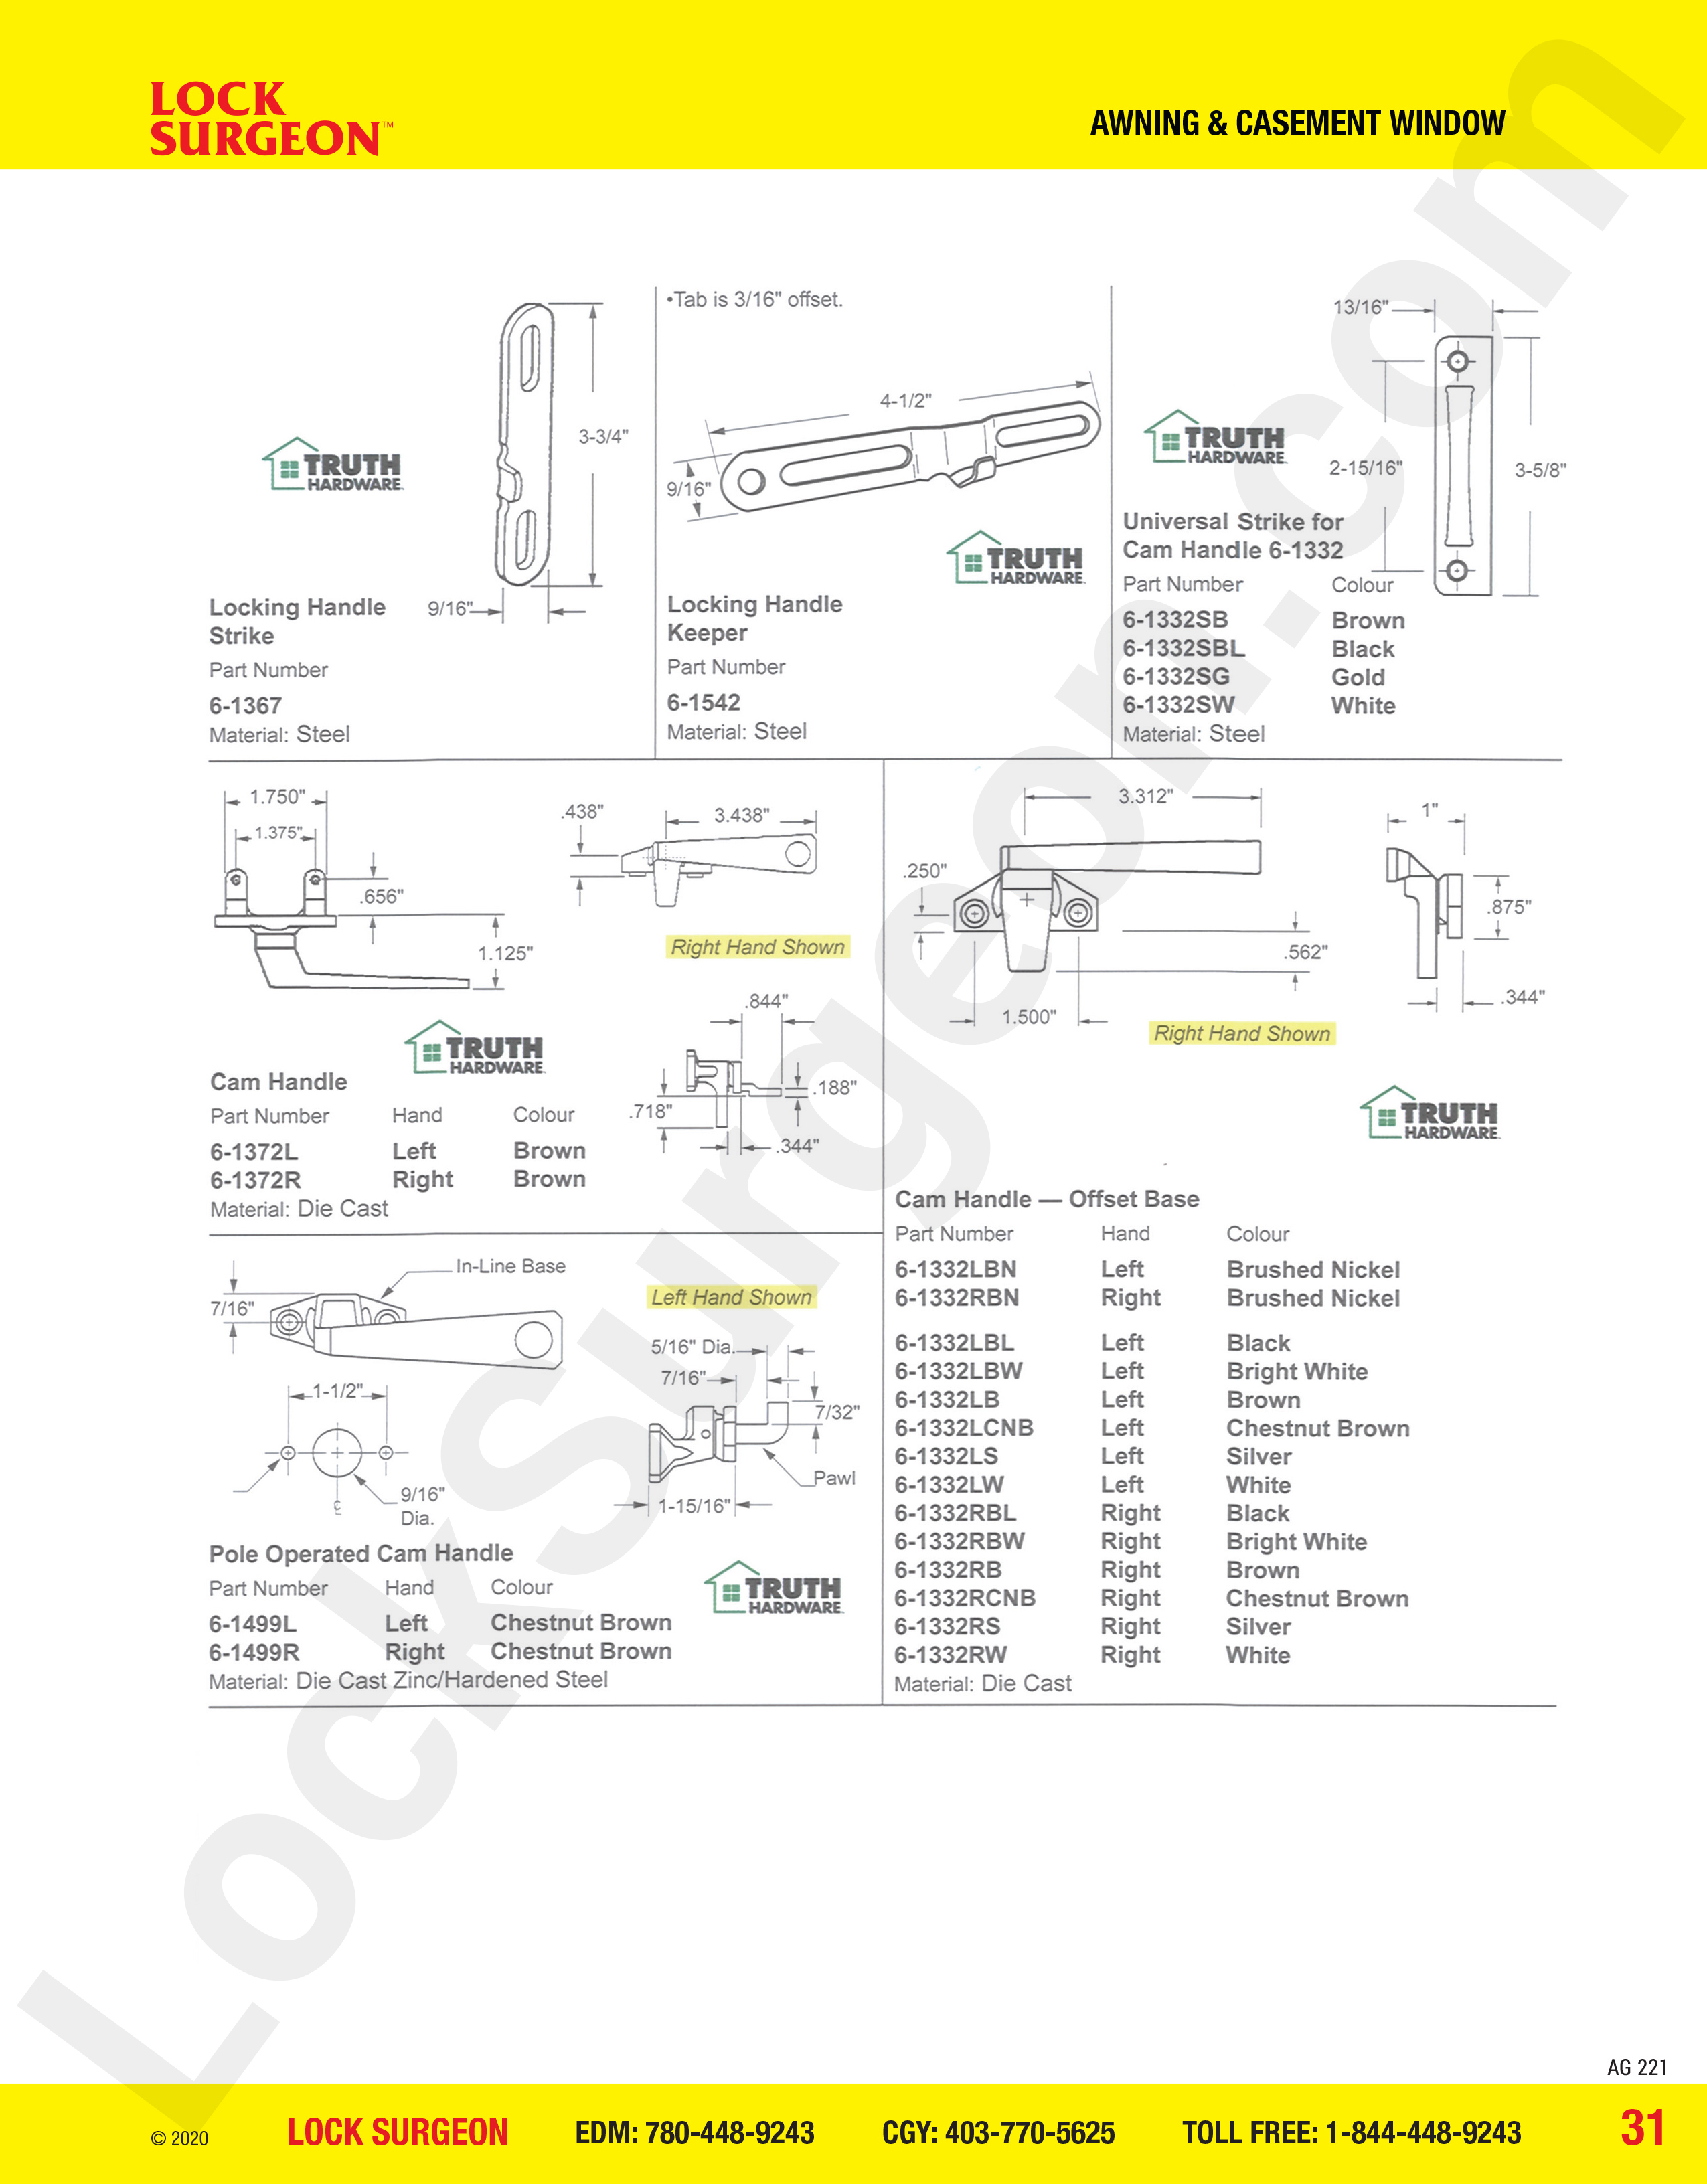 Acheson mobile awning and casement window parts for cam handles